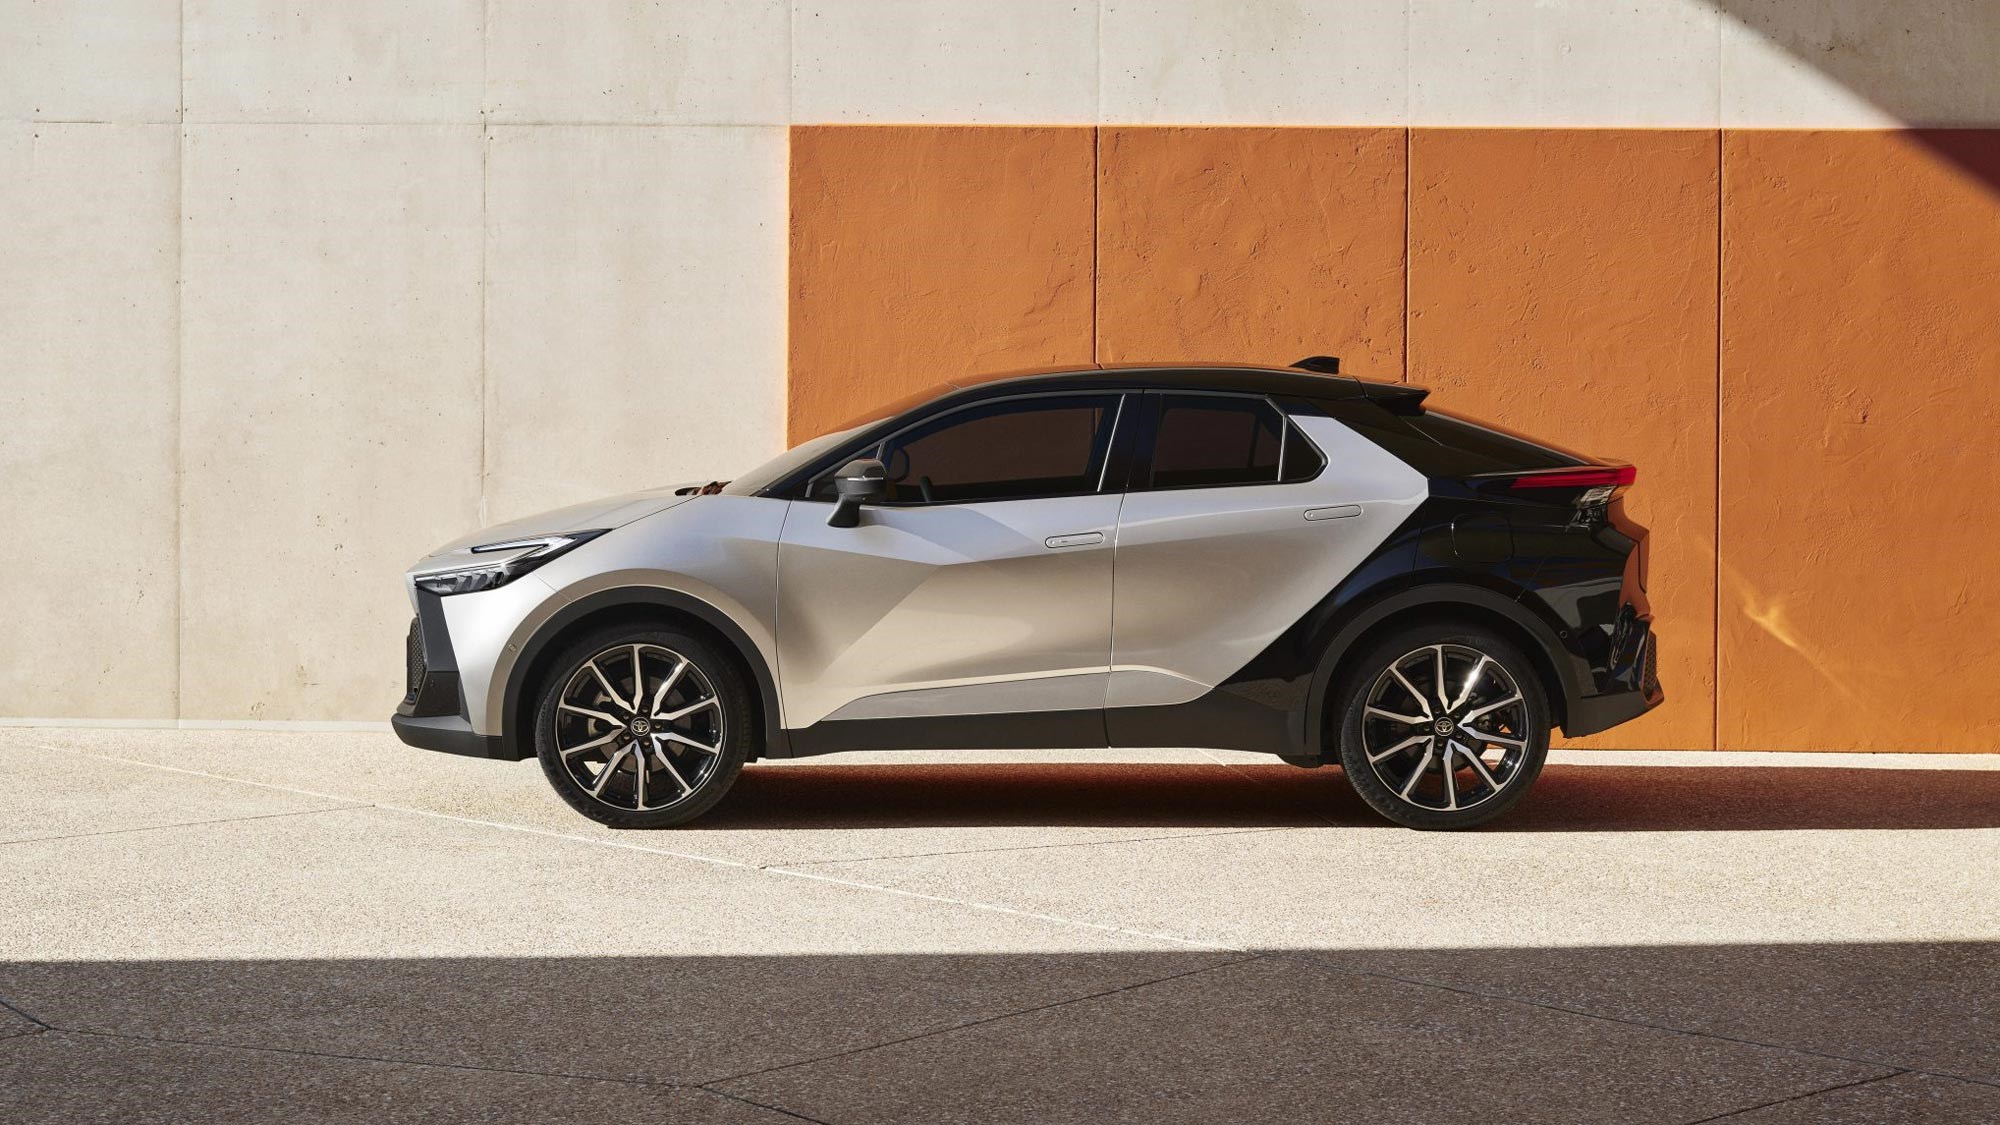 Next-Generation Toyota C-HR Not Coming To The US